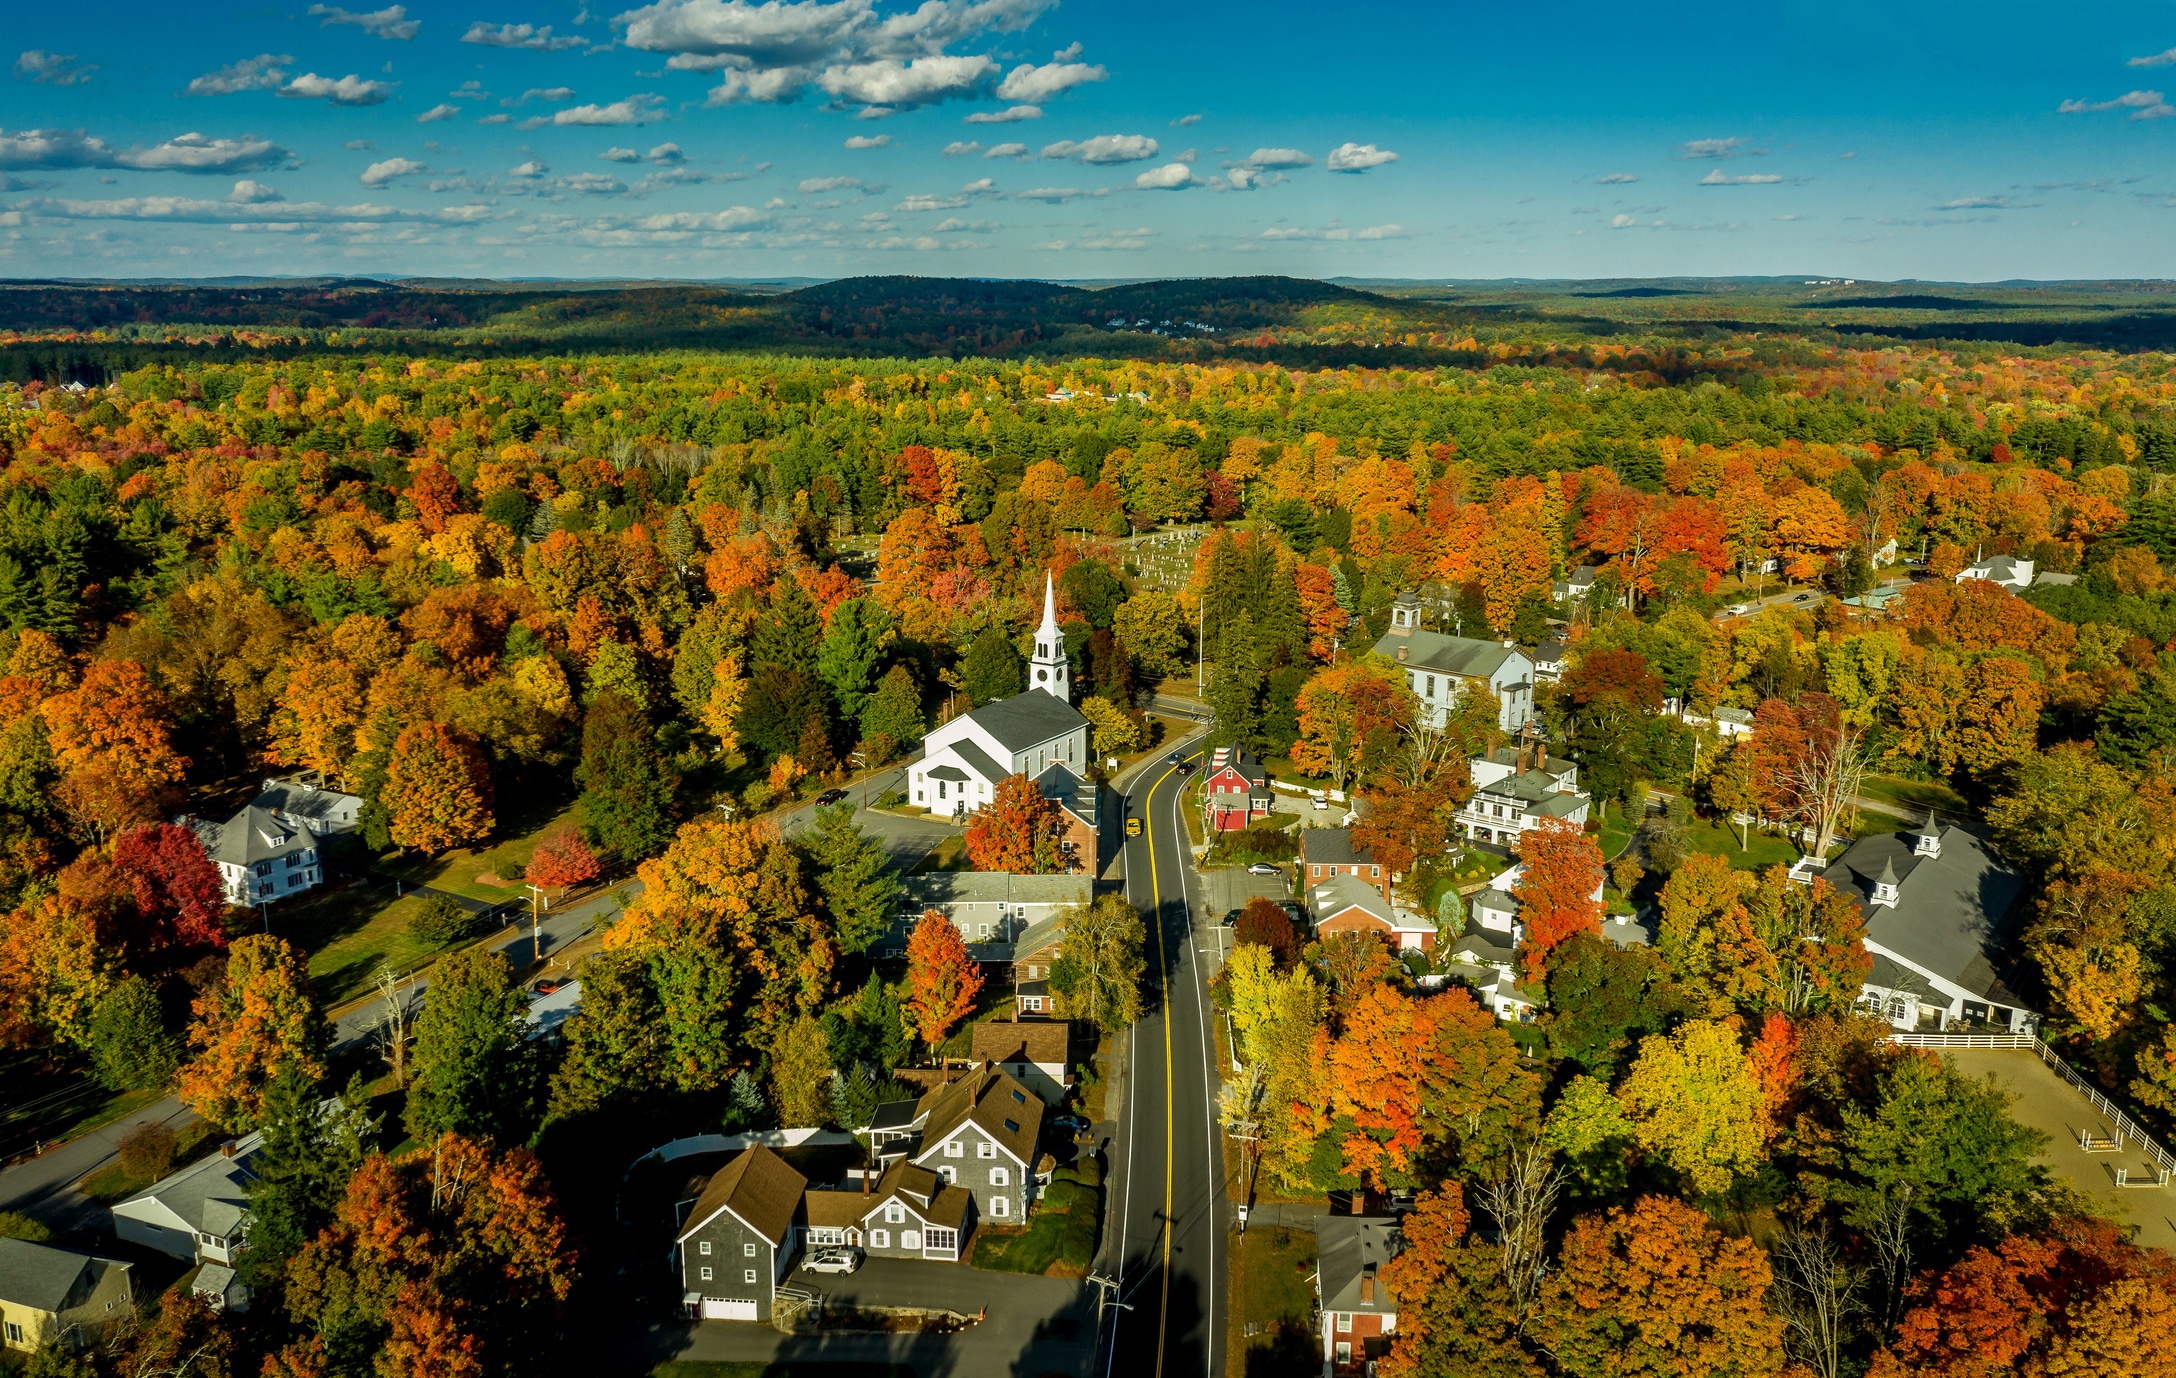 Aerial view of a Massachusetts town in autumn